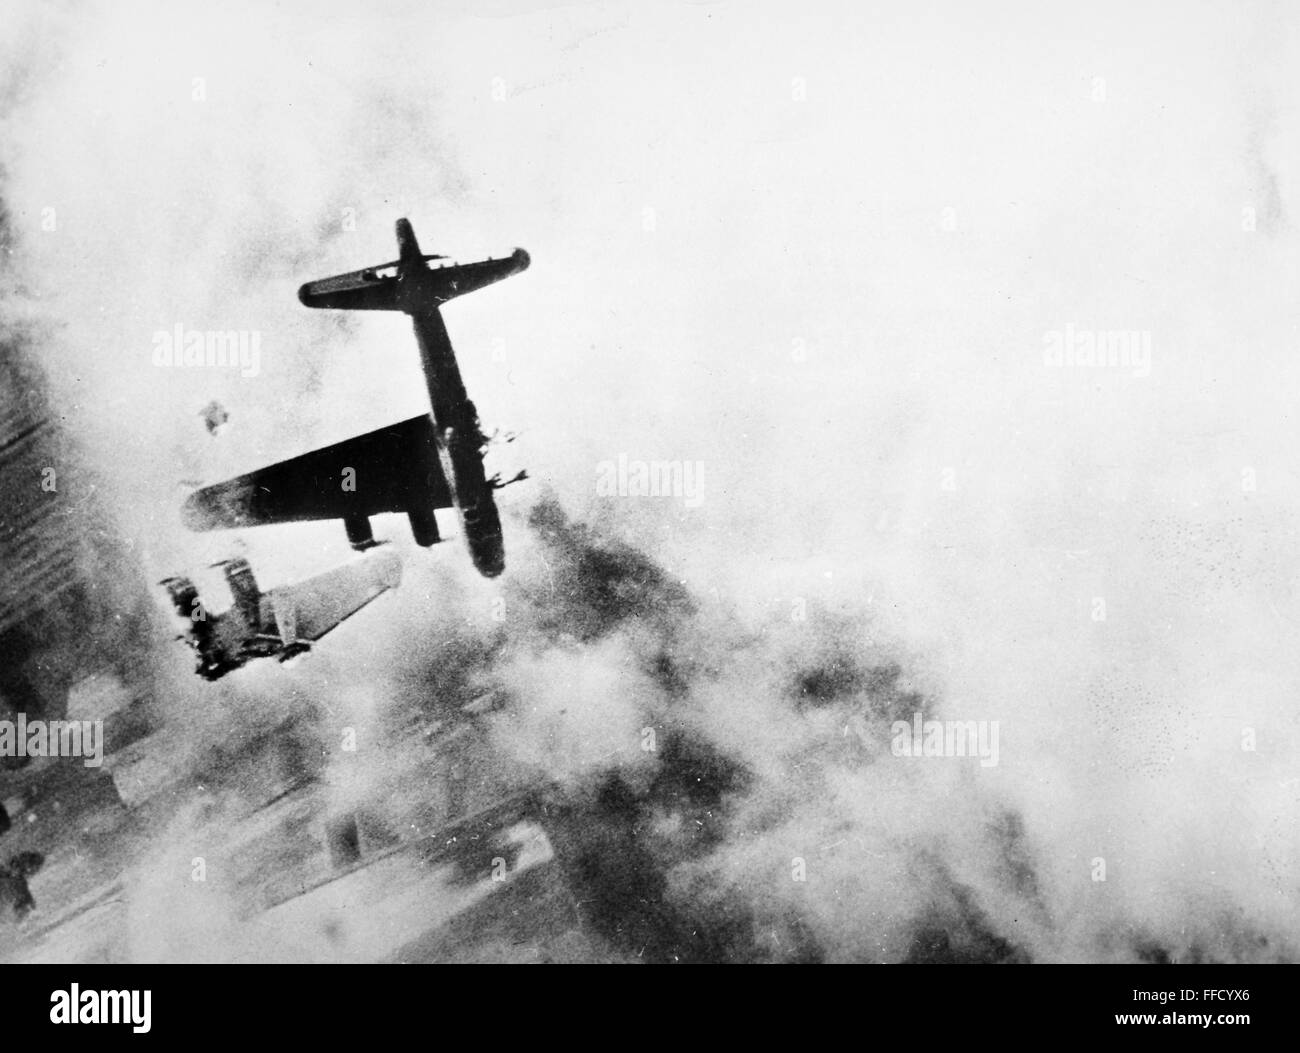 WORLD WAR II: B-17, 1945. /nA B-17 Flying Fortress of the U.S. 8th Air Force hit by cannon fire from German fighter planes while on a bombing mission over an ordnance depot at Oranienburg, Germany, 18 miles north of Berlin. Photographed April 1945. Stock Photo